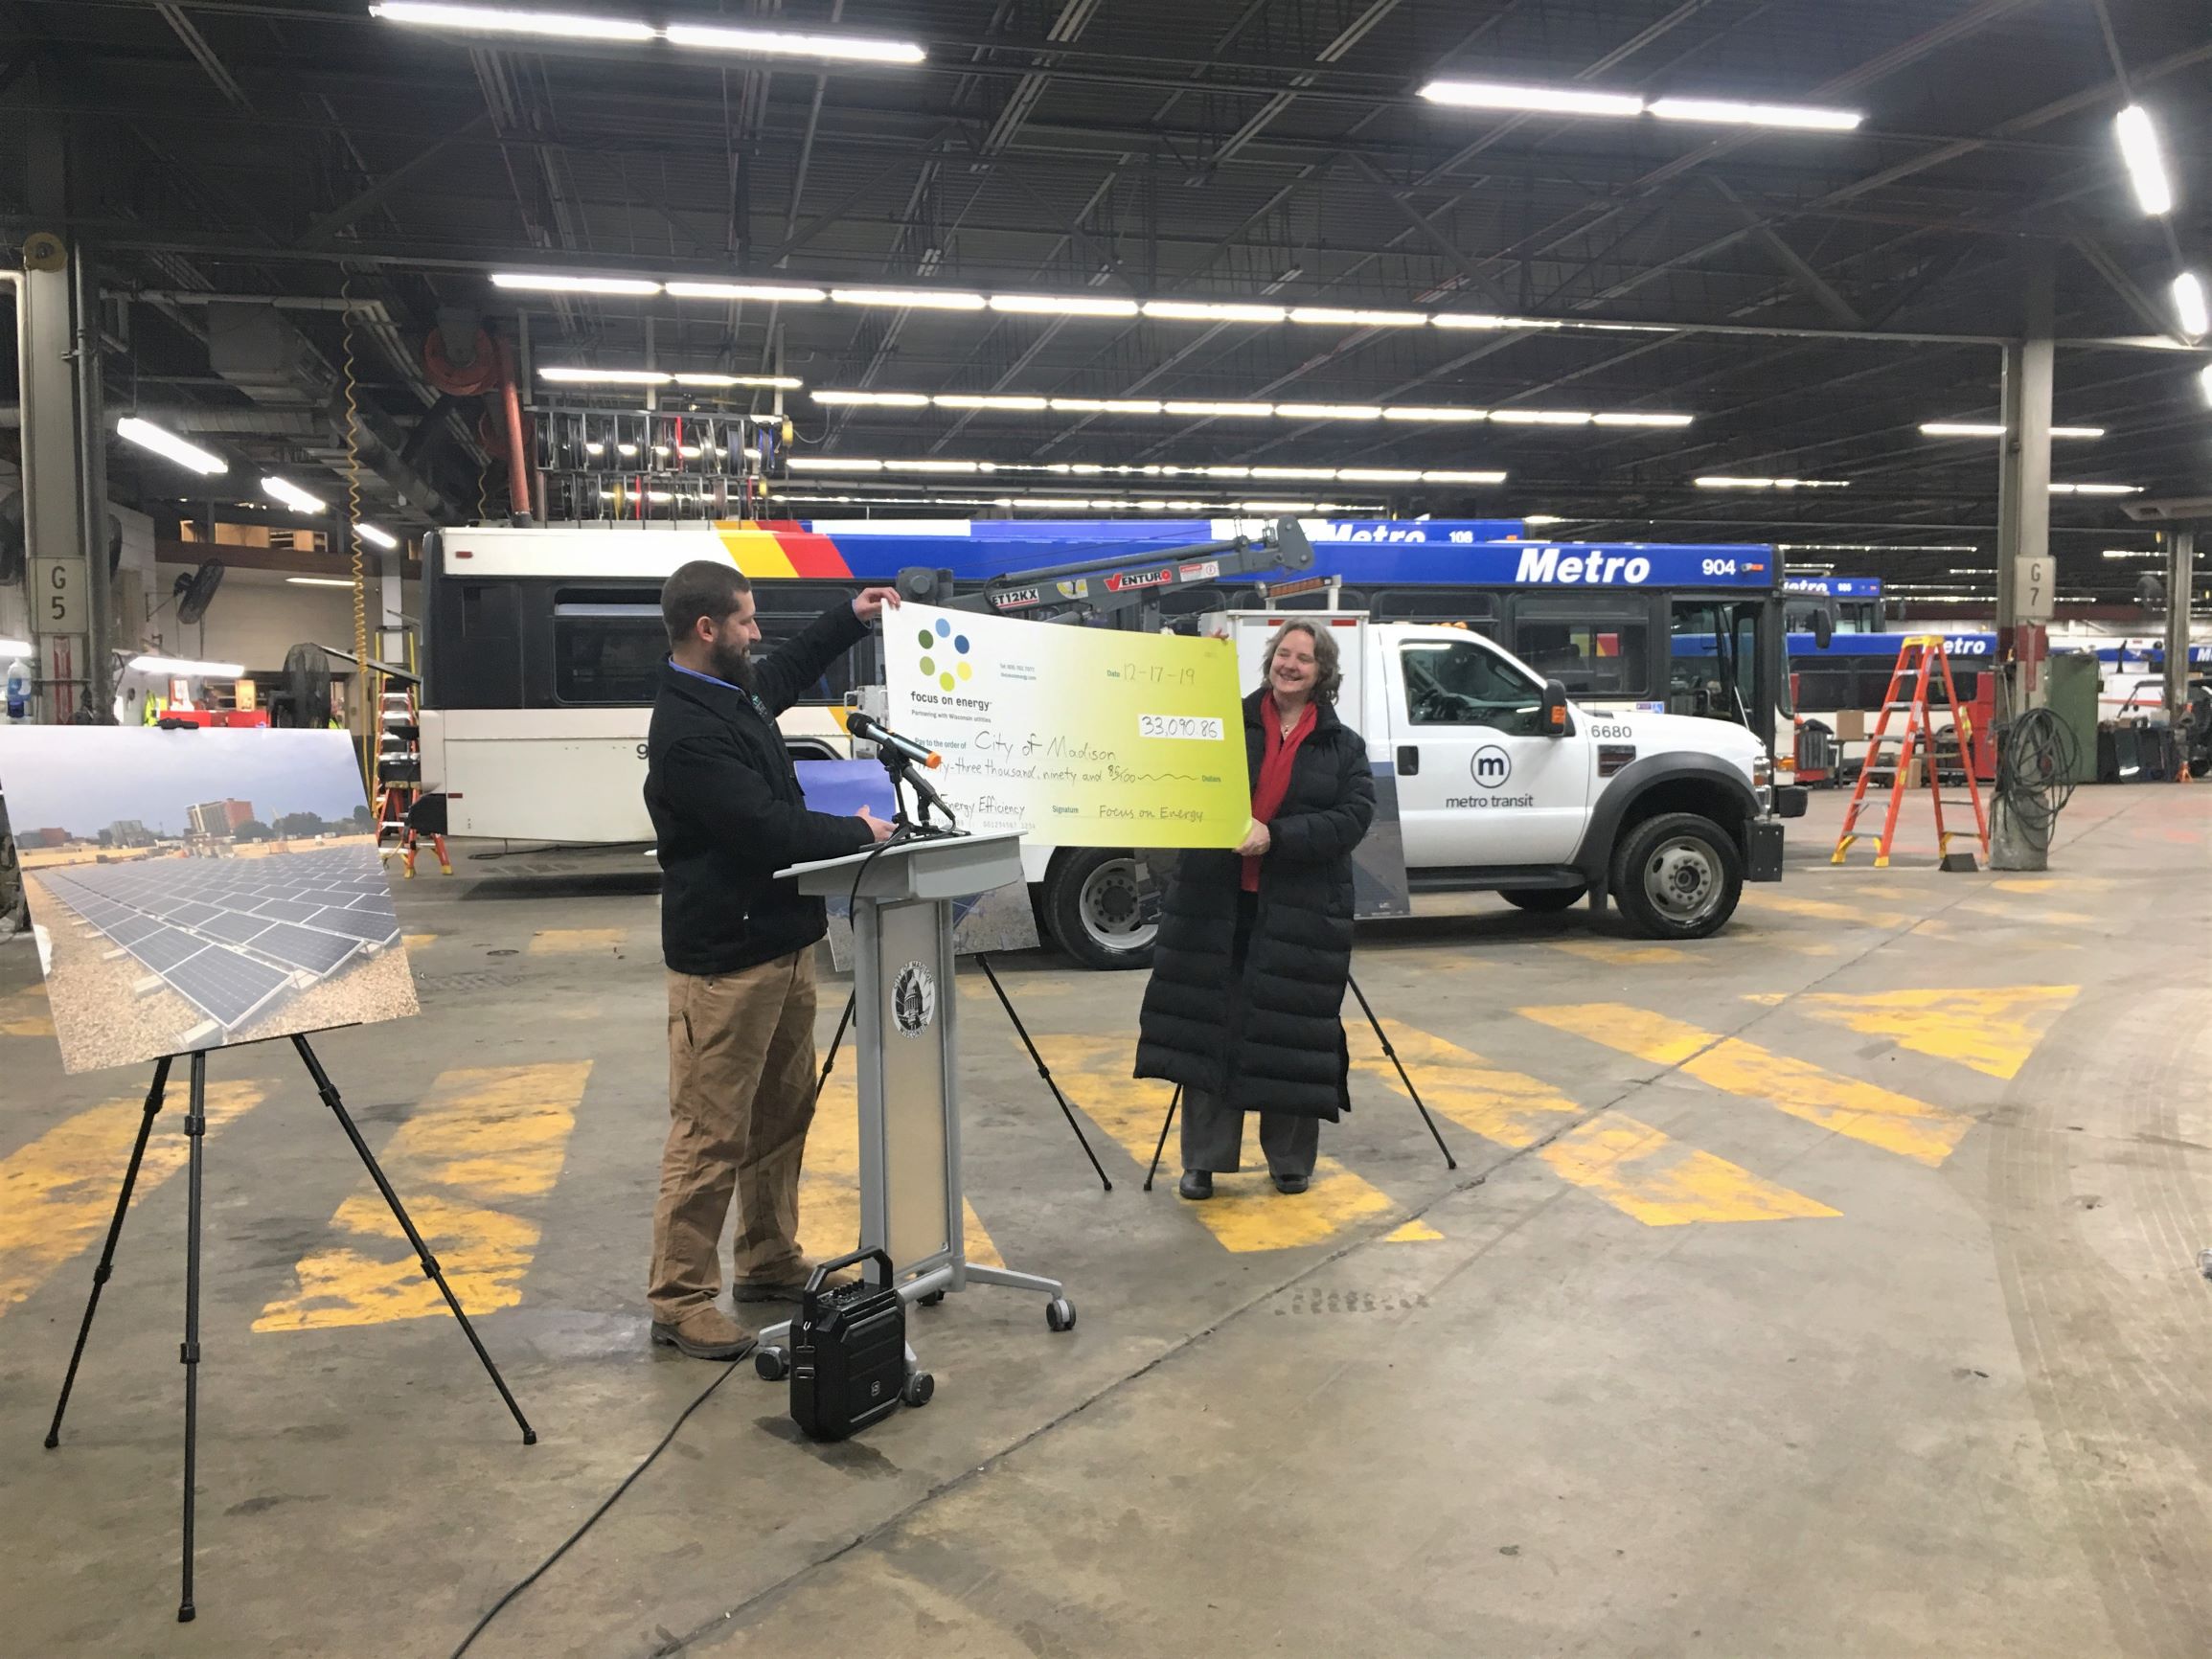 Two people stand holding a large, green ceremonial check with the Focus on Energy logo in a bus garage. A picture of solar panels is on display, and buses and other Metro Transit vehicles can be seen in the background. There is a podium in the center of the photo with the City of Madison seal. 